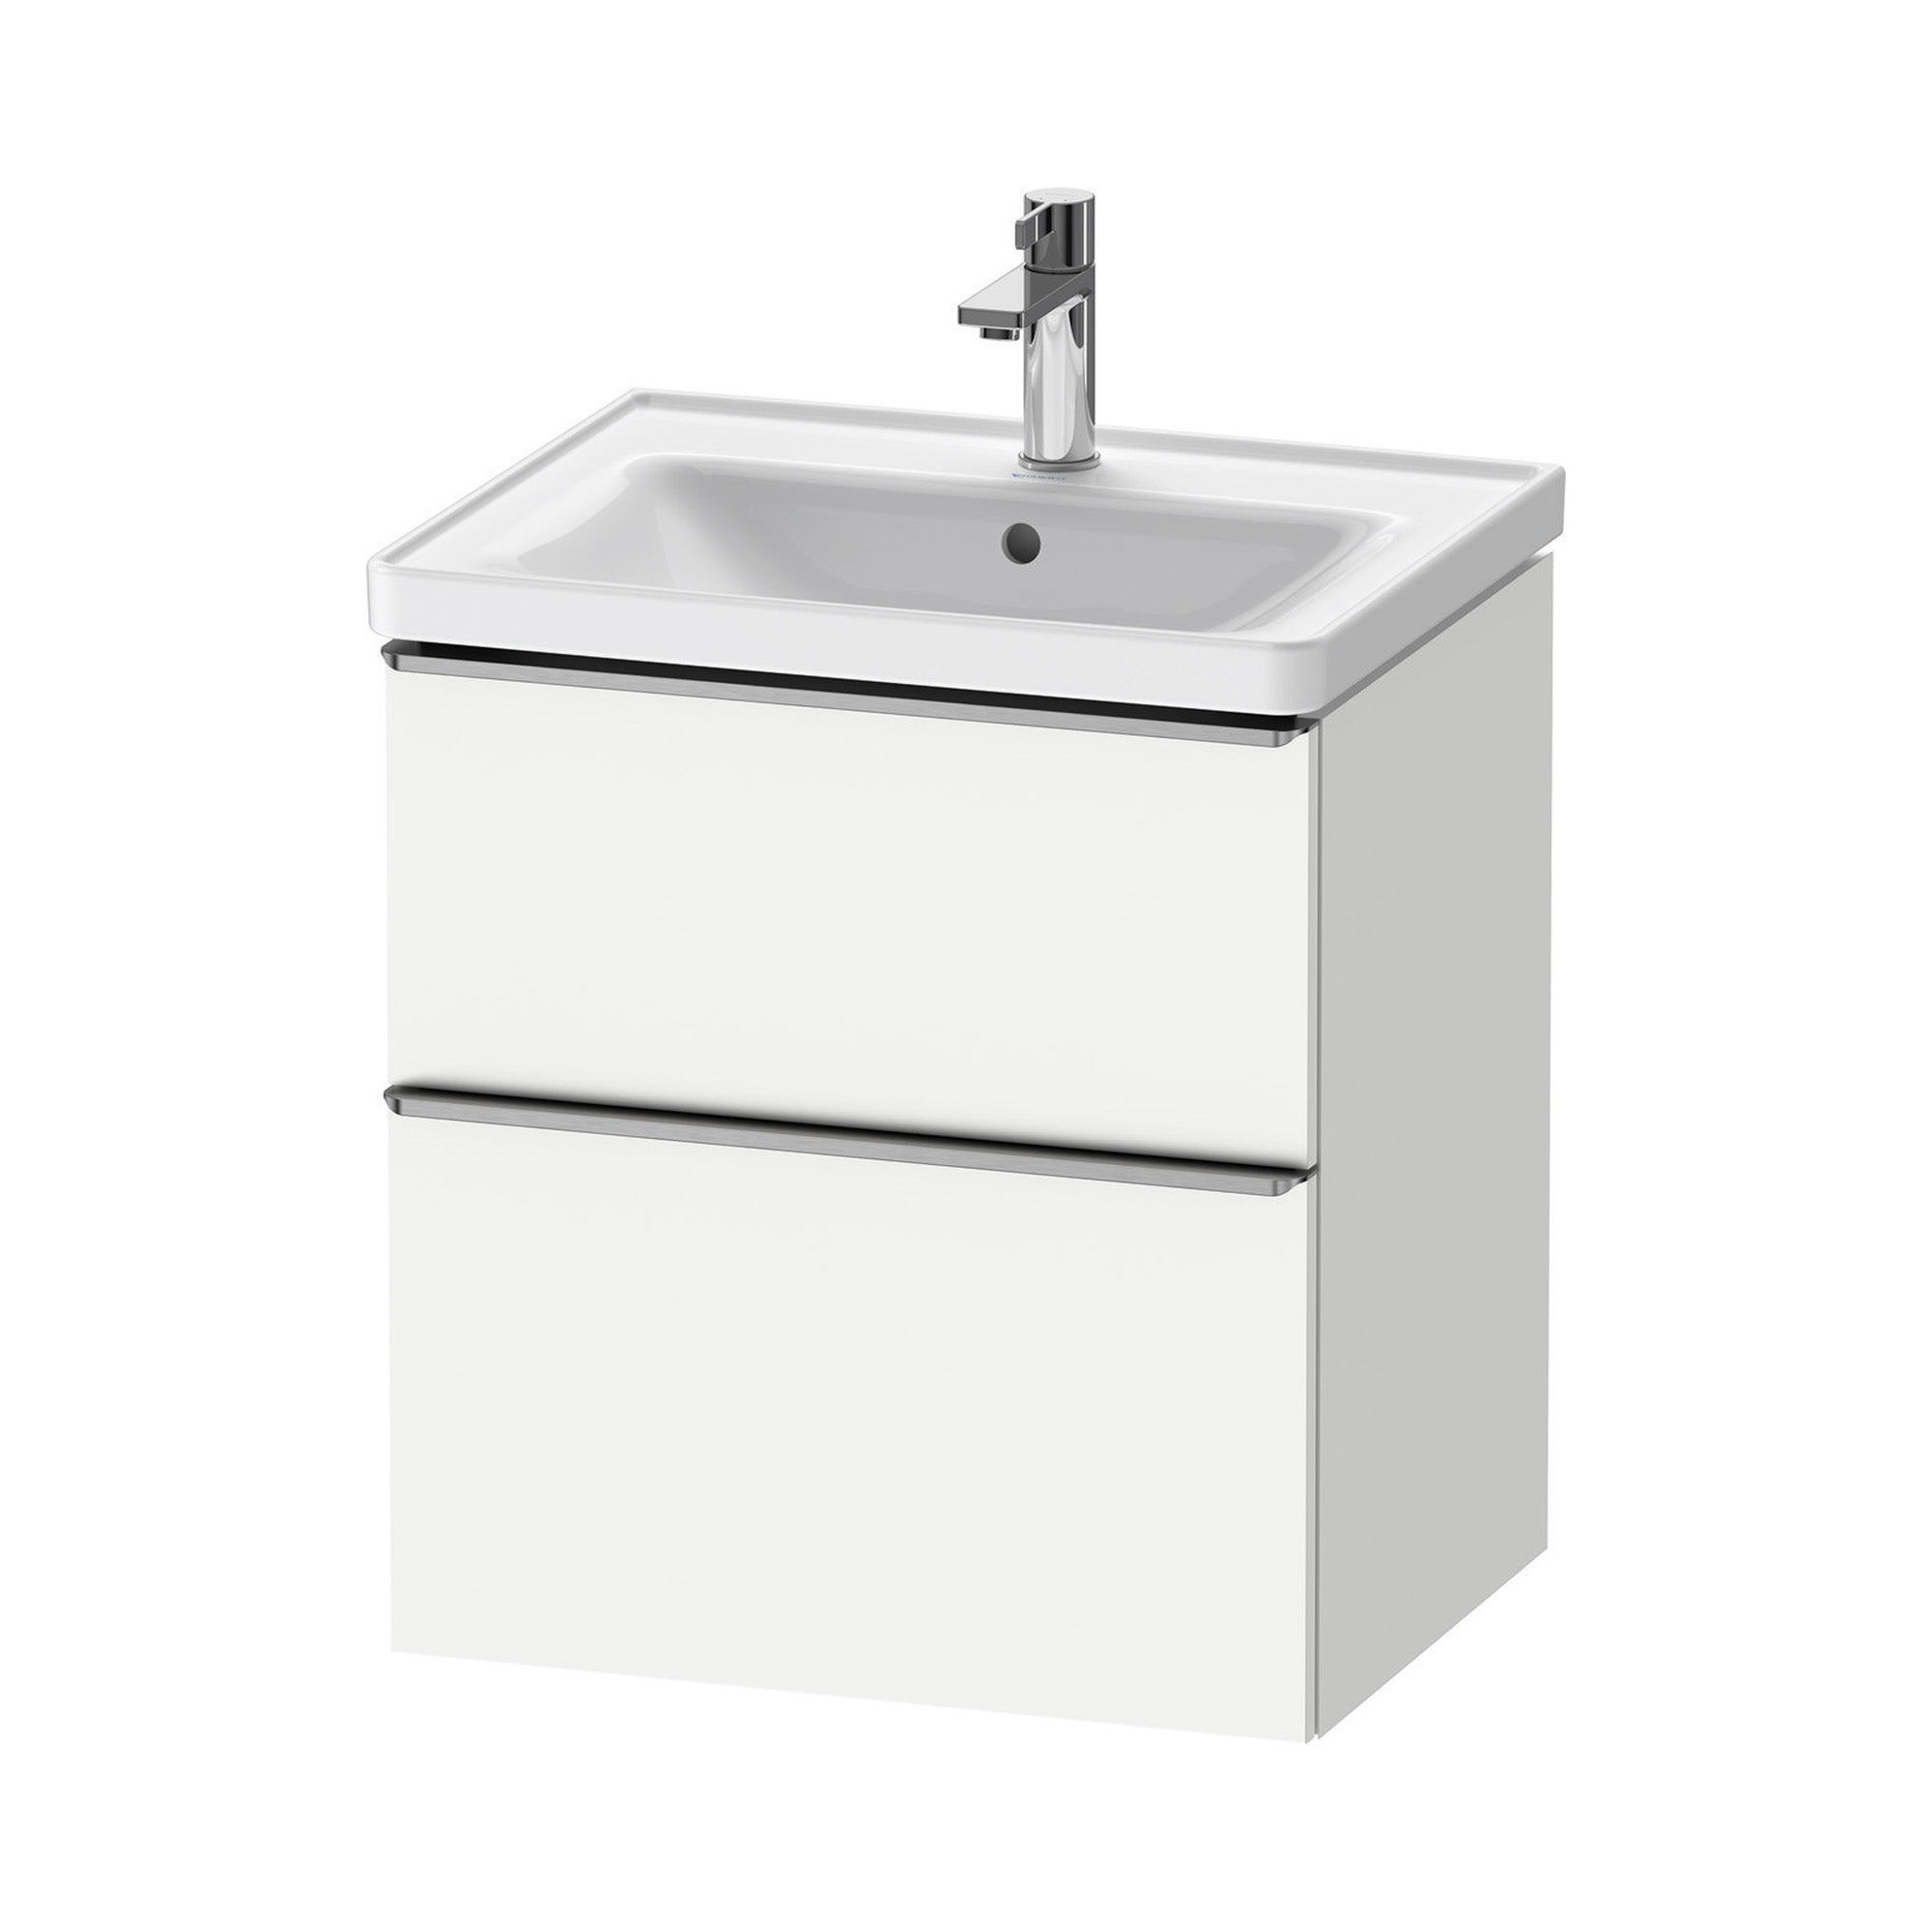 duravit d-neo 600 wall mounted vanity unit with d-neo basin matt white stainless steel handles